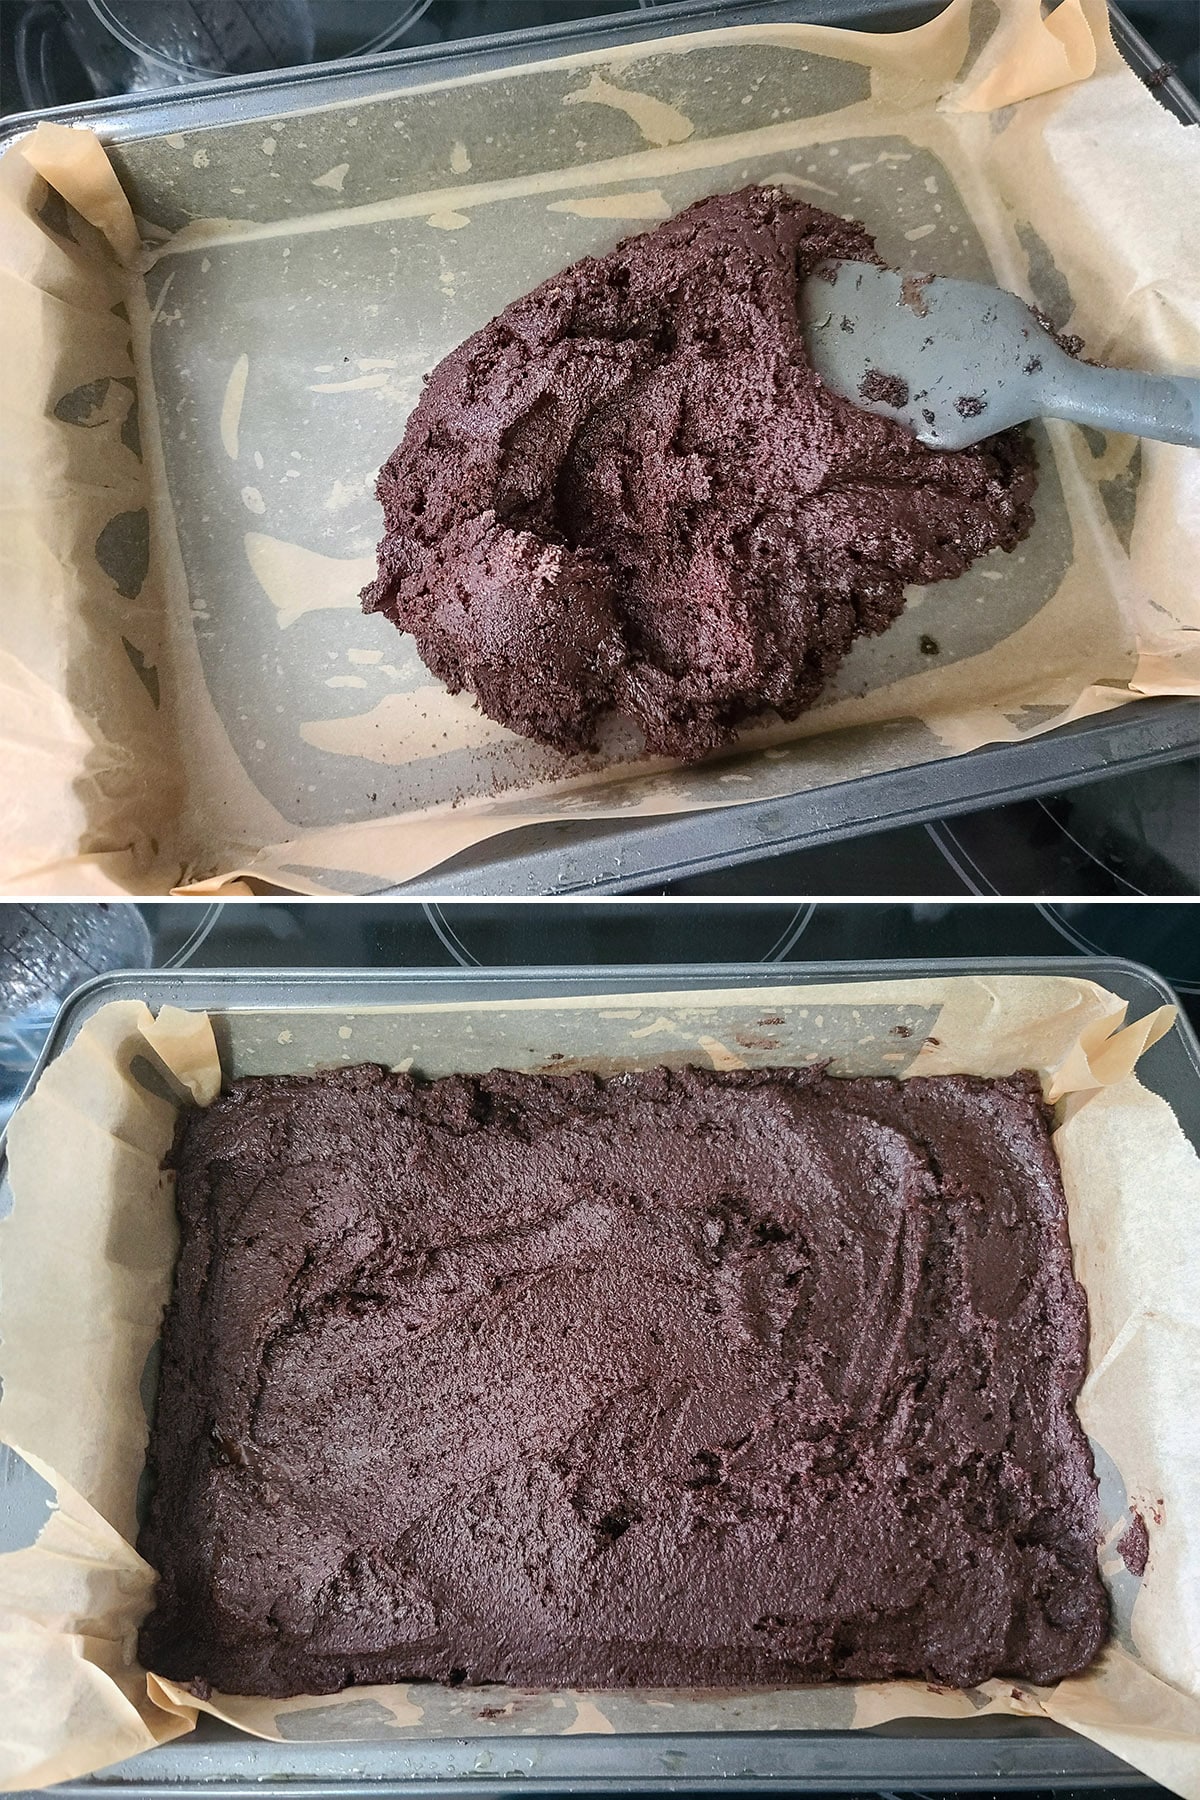 A 2 part image showing the gluten free brownie batter being spread in a pan lined with parchment paper.